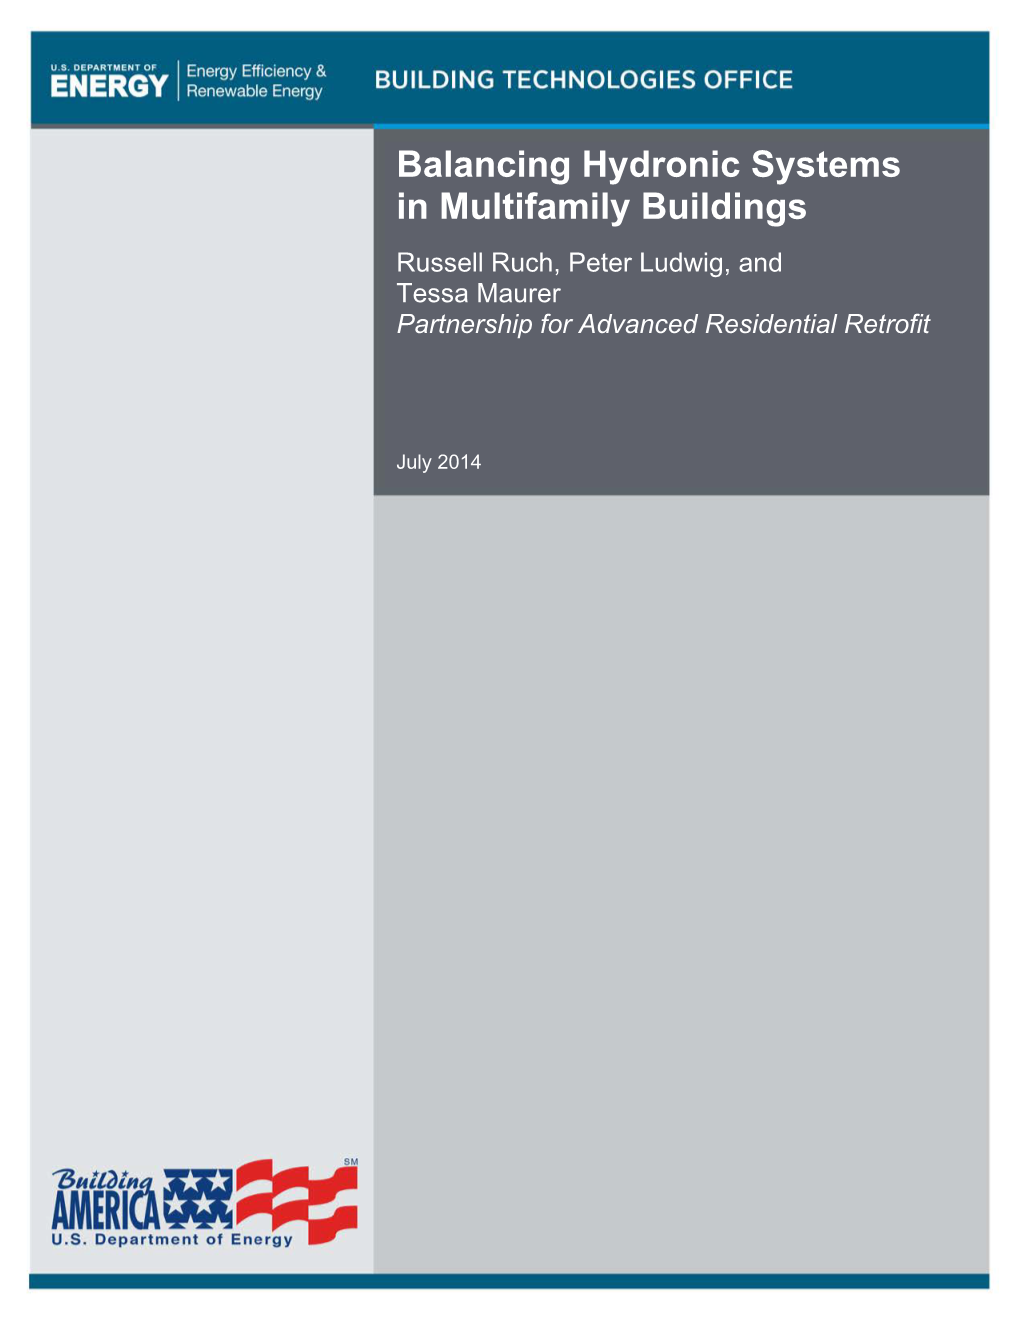 Balancing Hydronic Systems in Multifamily Buildings Russell Ruch, Peter Ludwig, and Tessa Maurer Partnership for Advanced Residential Retrofit